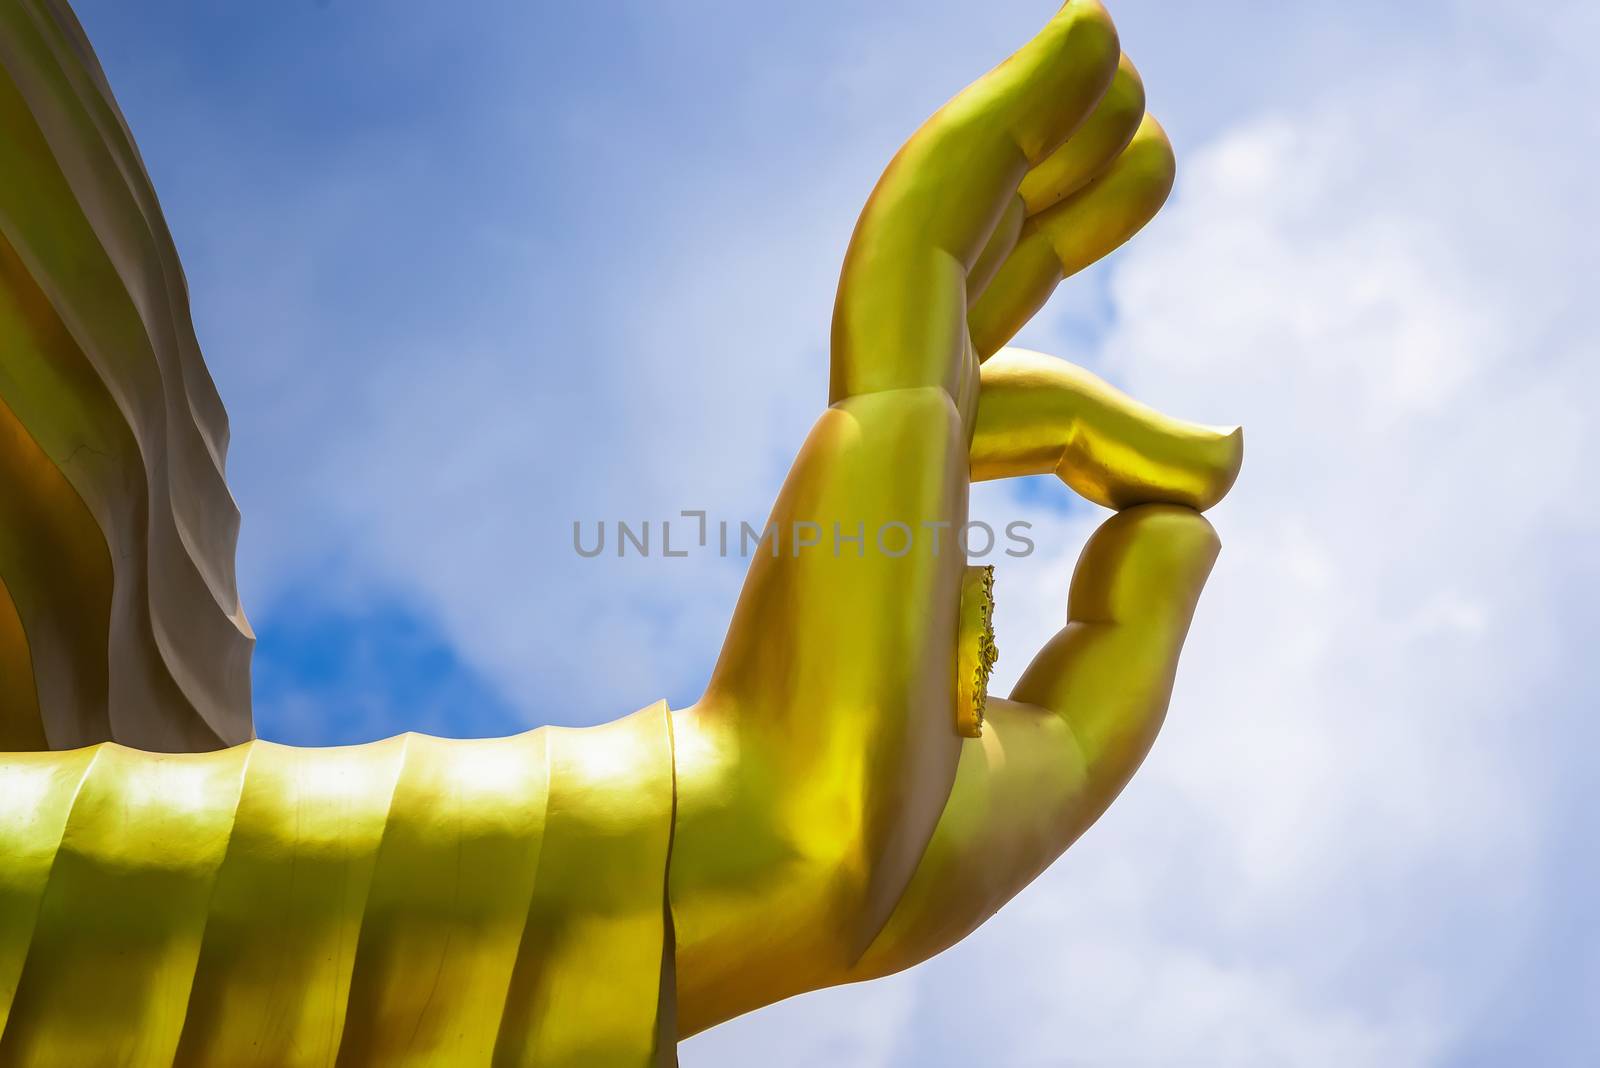 The hand of Big Goldden Buddha statue of Chareon Rat Bamrung Tem by Bubbers